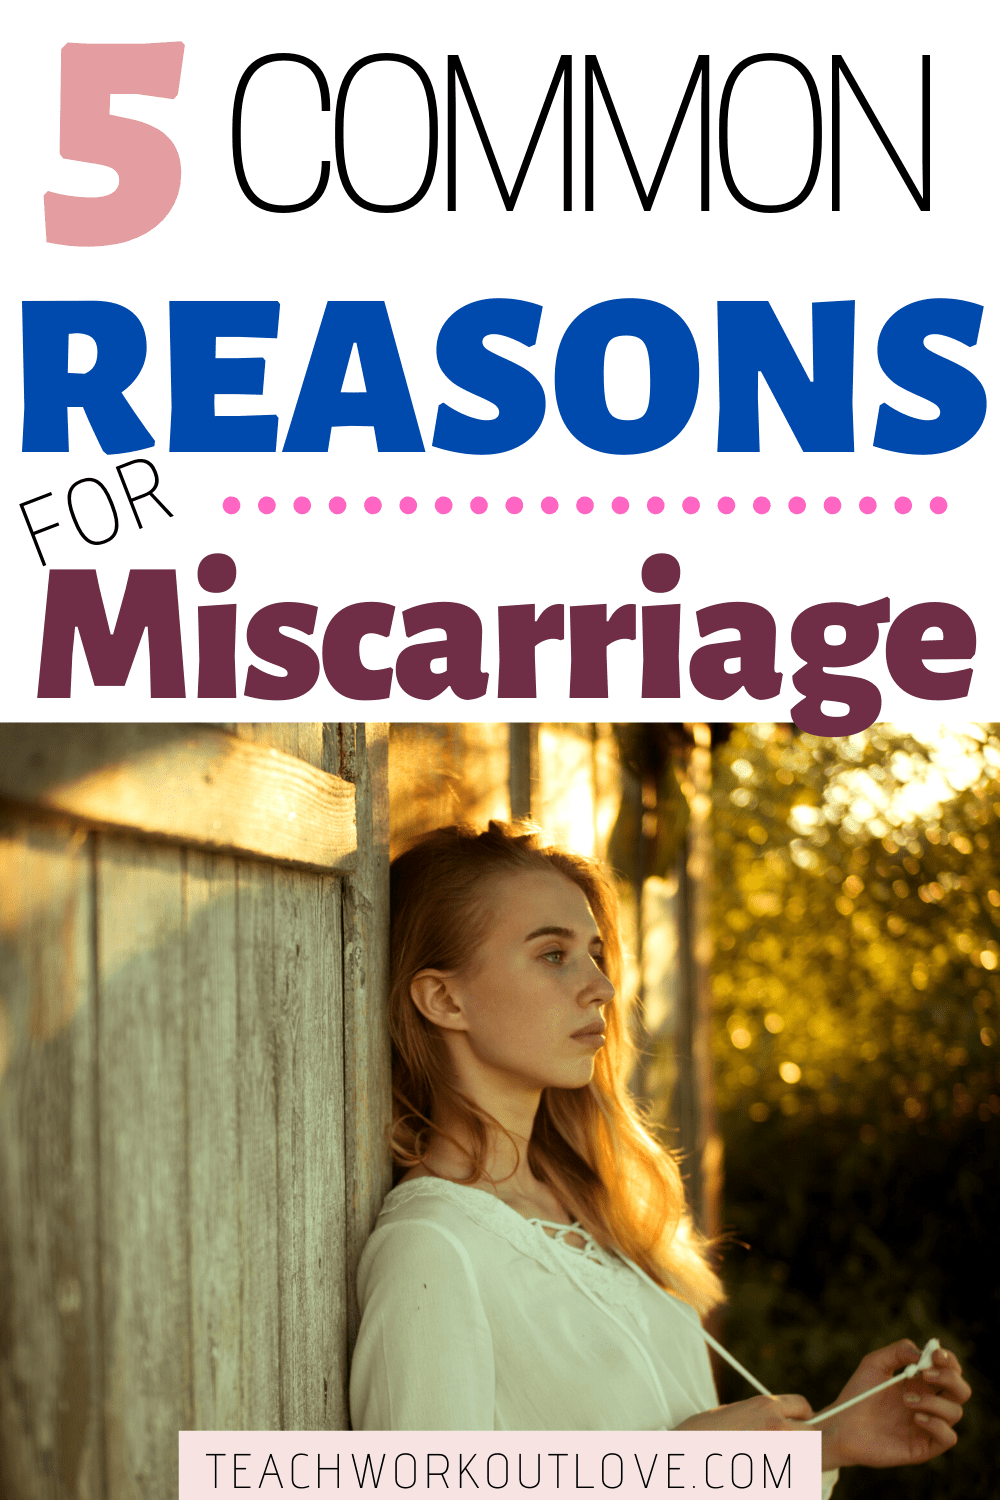 There's many different reasons one can have a miscarriage, and a majority you can't control. This article offers insight & reasons why miscarriages exist.